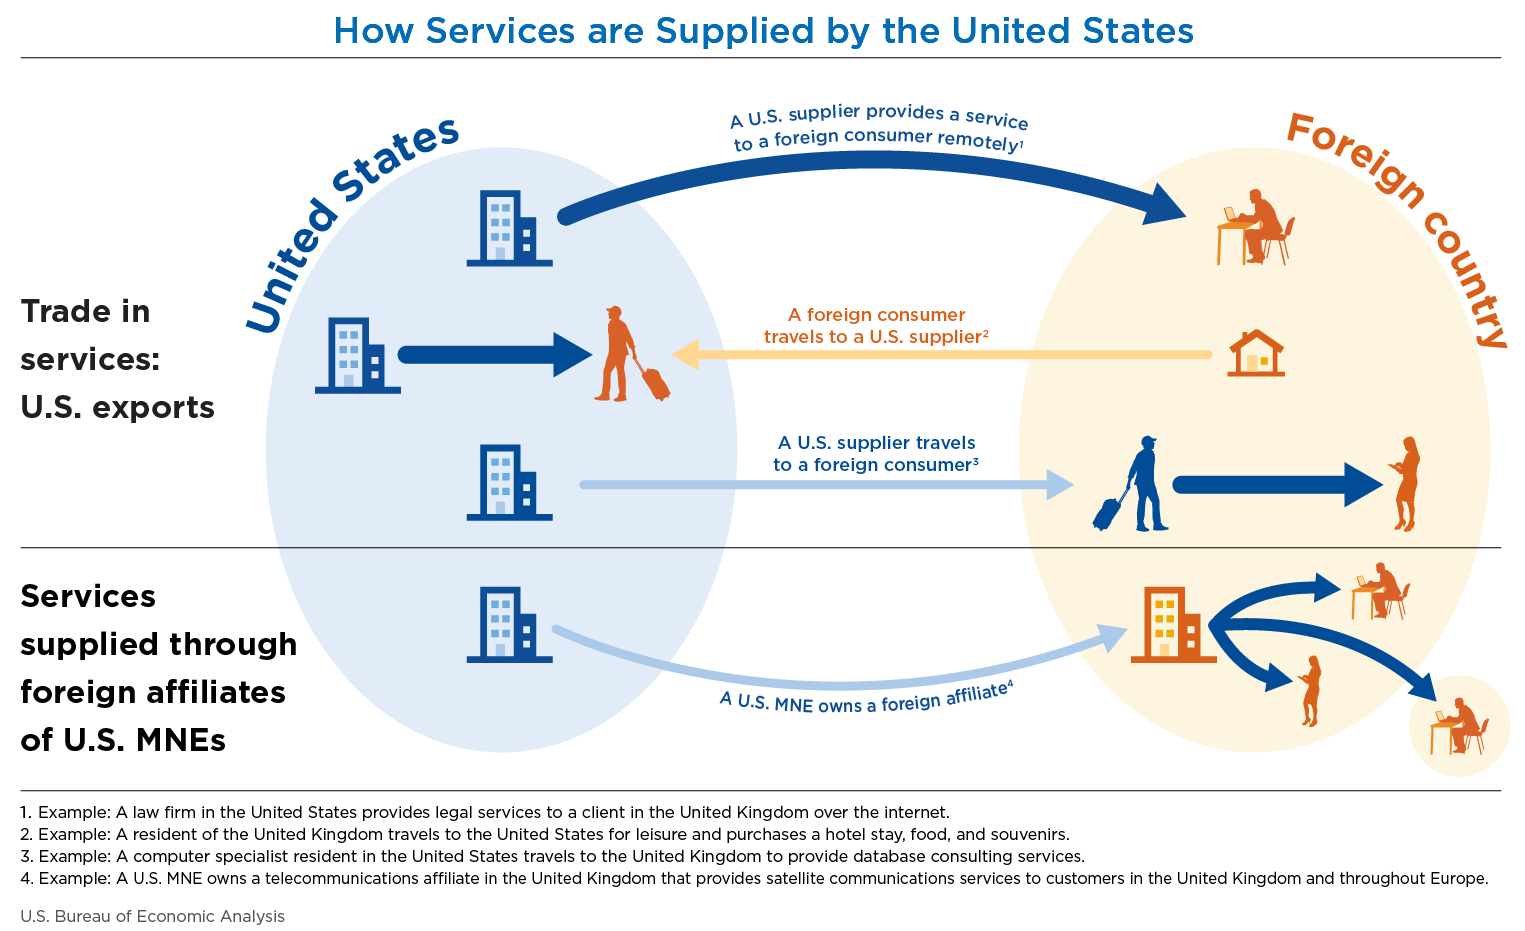 How Services are supplied by the United States